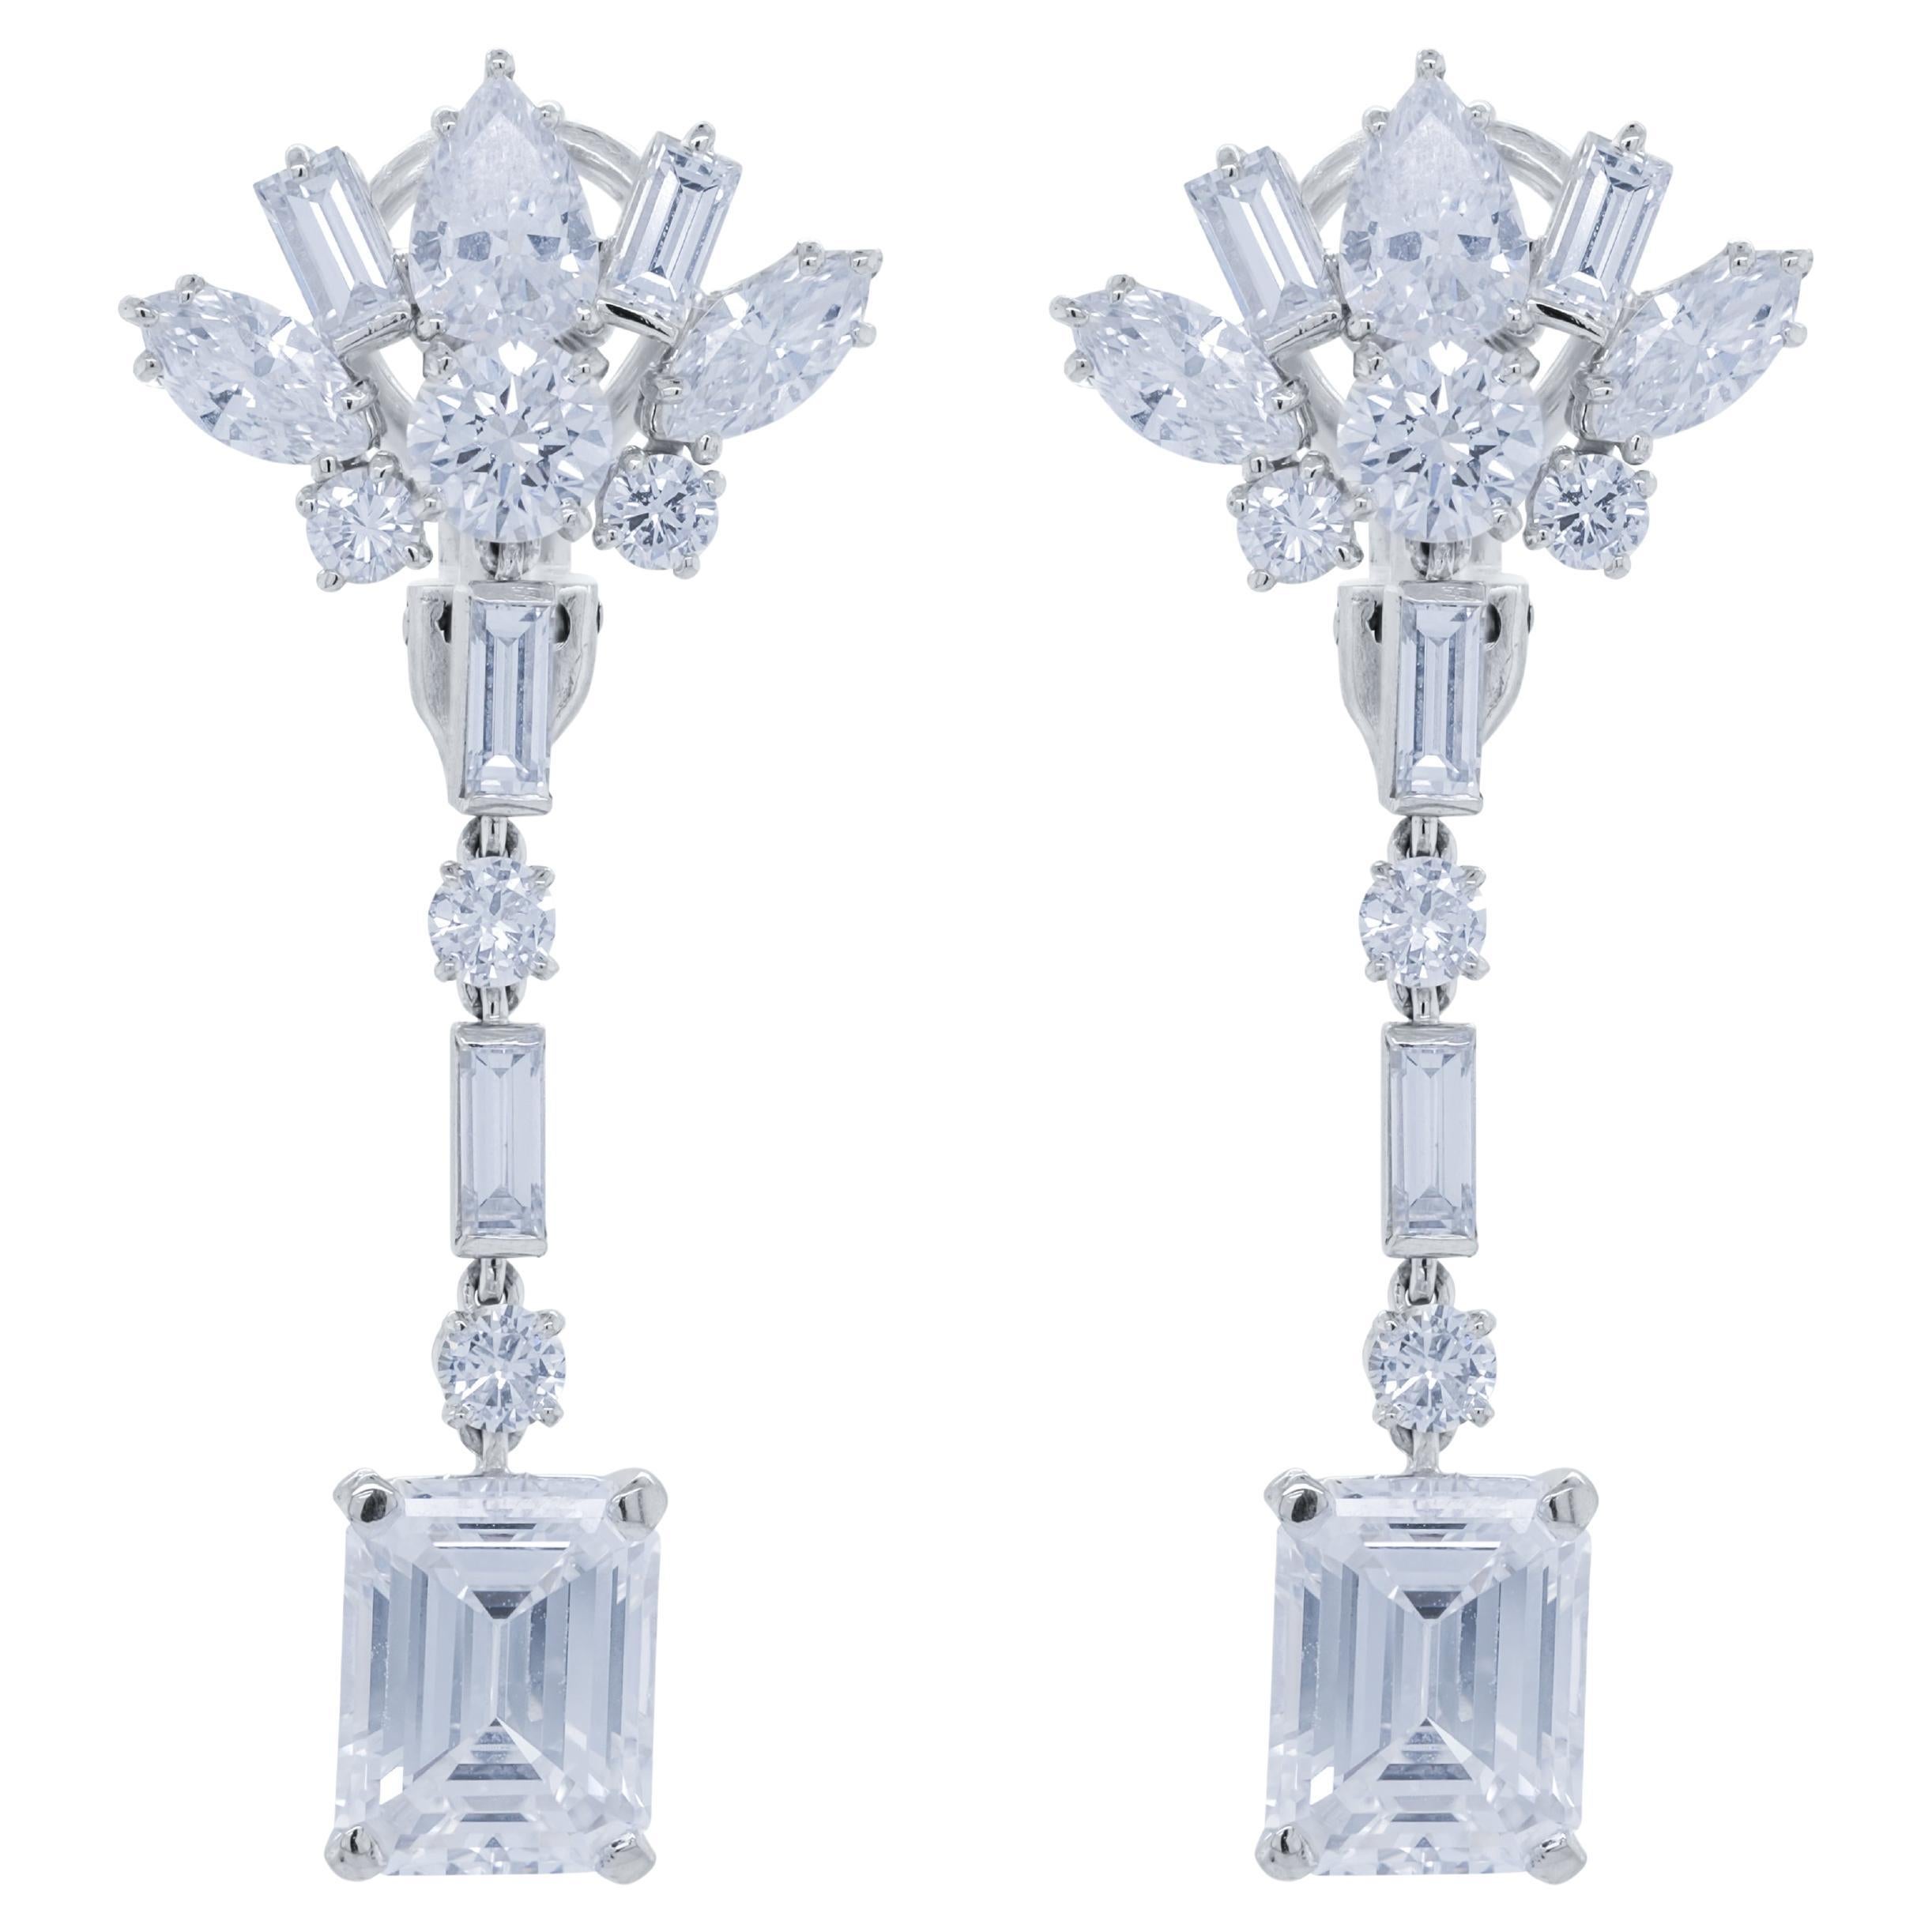 Diana M. PLATINUM EARRINGS  SET WITH GIA DIAMONDS 2.47CT E VVS2 AND 2.63 F IF For Sale